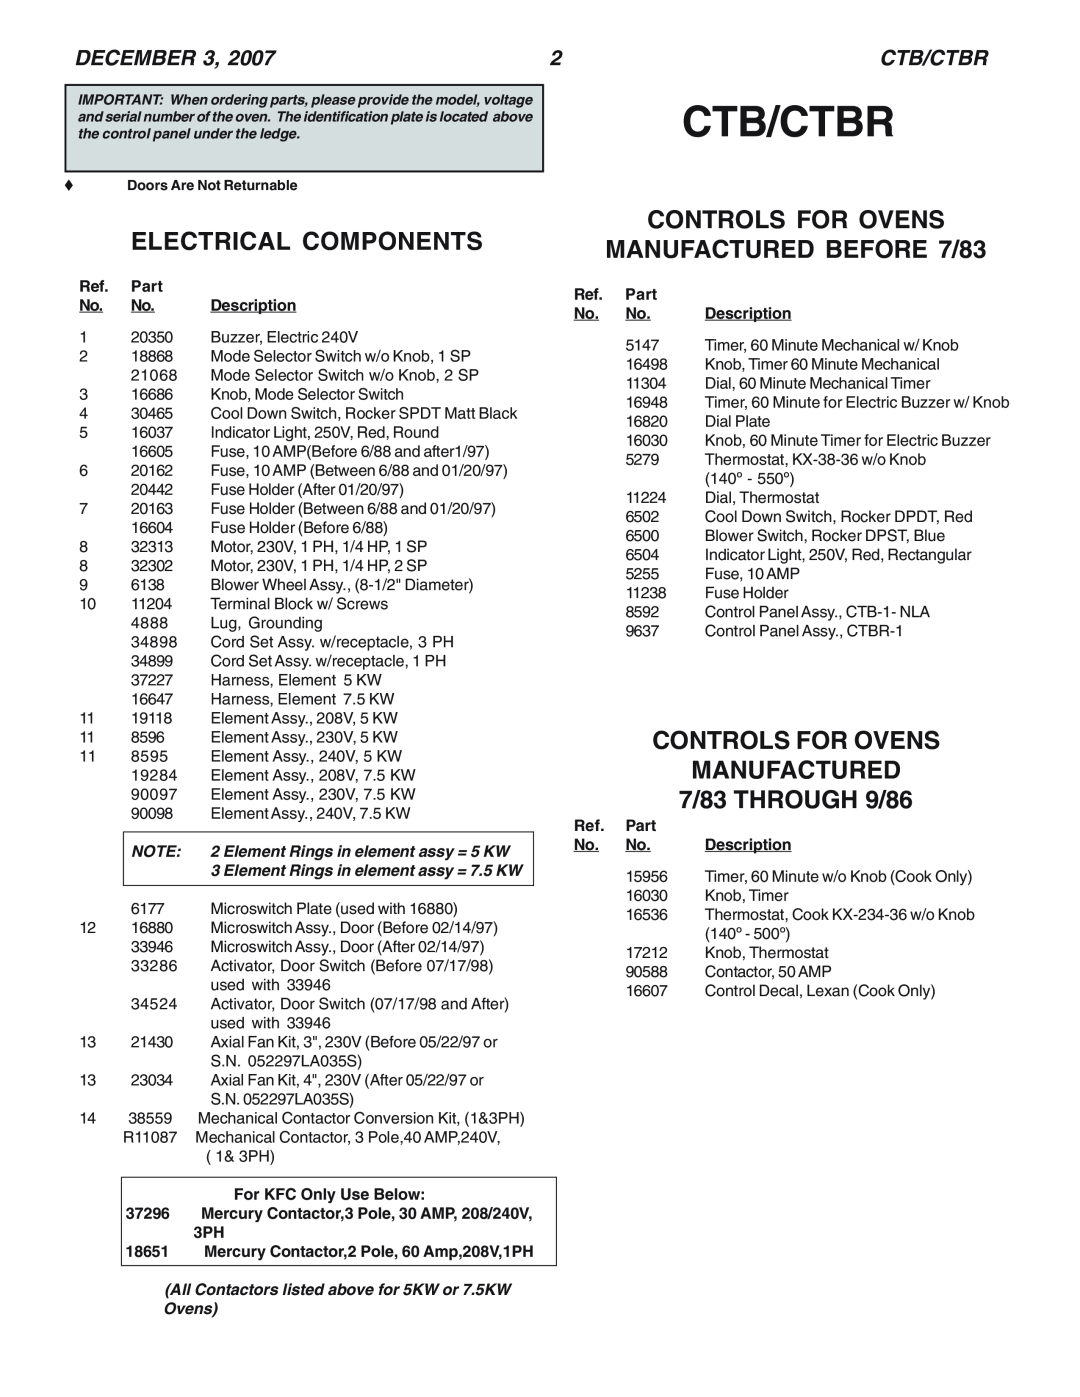 Blodgett CTBR manual Electrical Components, CONTROLS FOR OVENS MANUFACTURED BEFORE 7/83, December, Ctb/Ctbr 